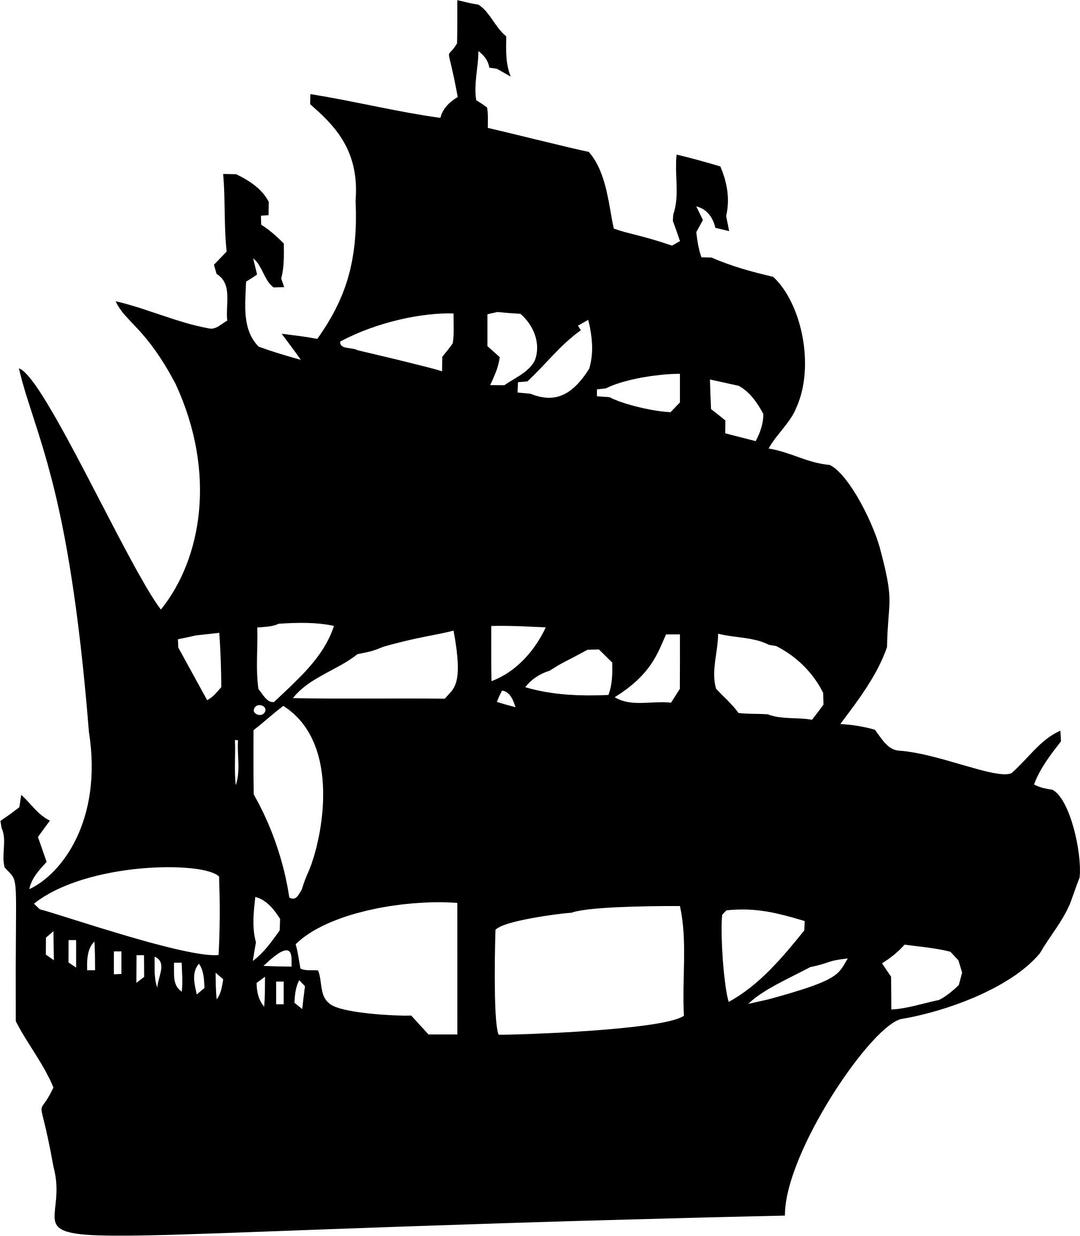 Medieval Galleon Silhouette png transparent